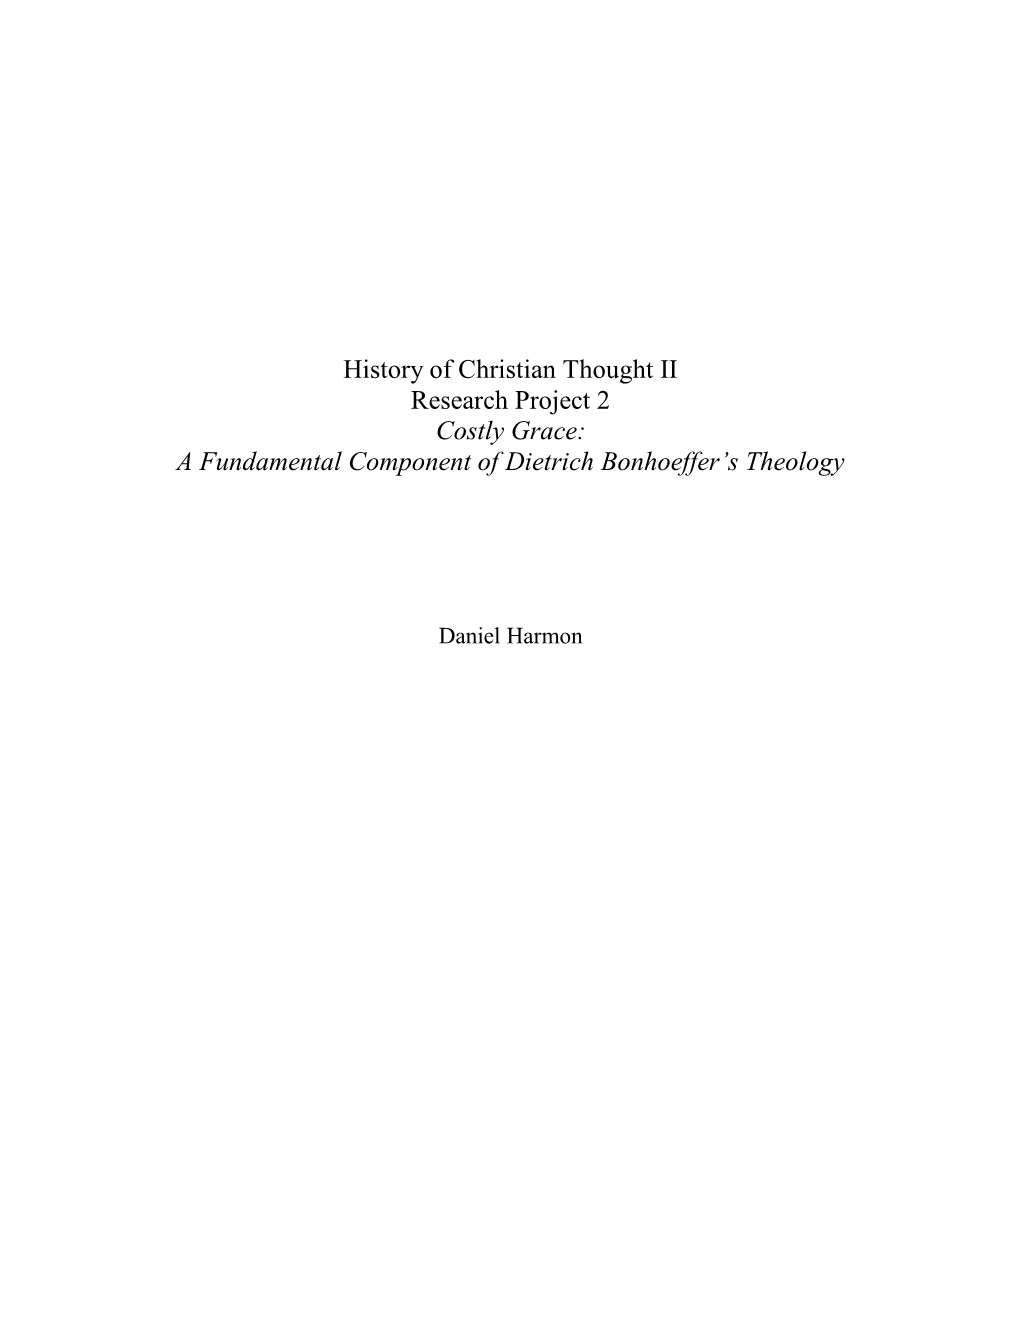 History of Christian Thought II Research Project 2 Costly Grace: a Fundamental Component of Dietrich Bonhoeffer’S Theology